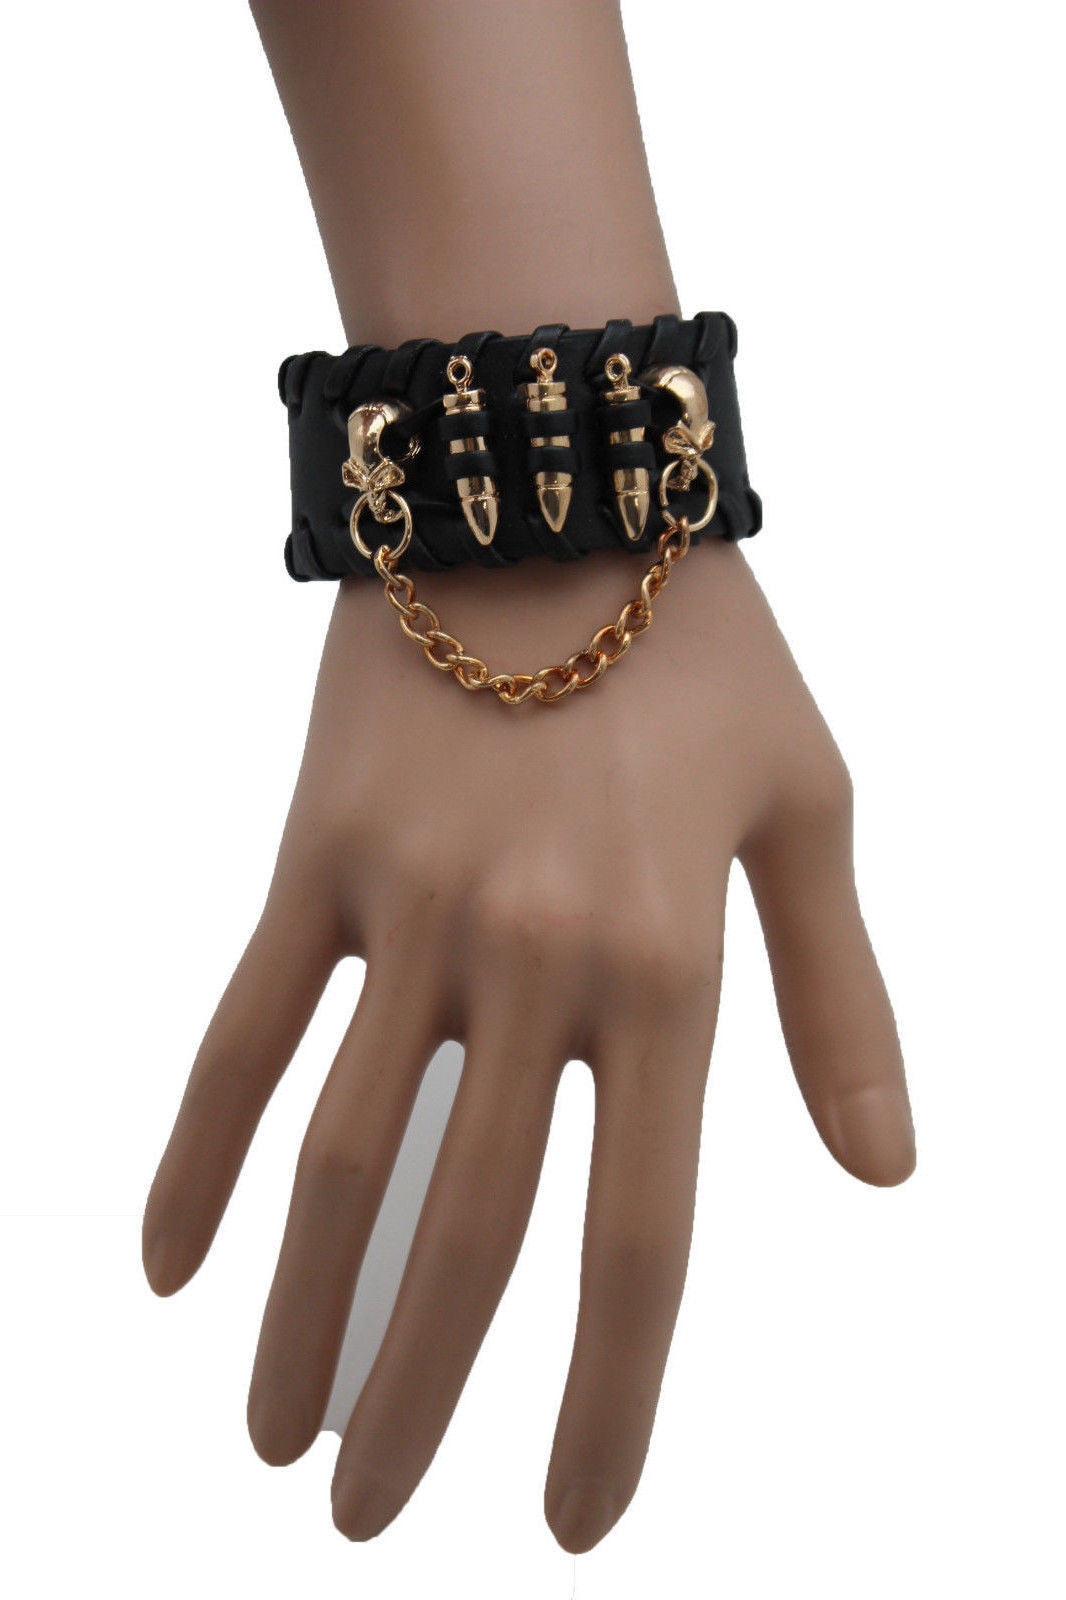 Black Faux Leather Gold Metal Bracelet Chains Skulls Bullet Charms Women Men Fashion Jewelry Accessories - alwaystyle4you - 4